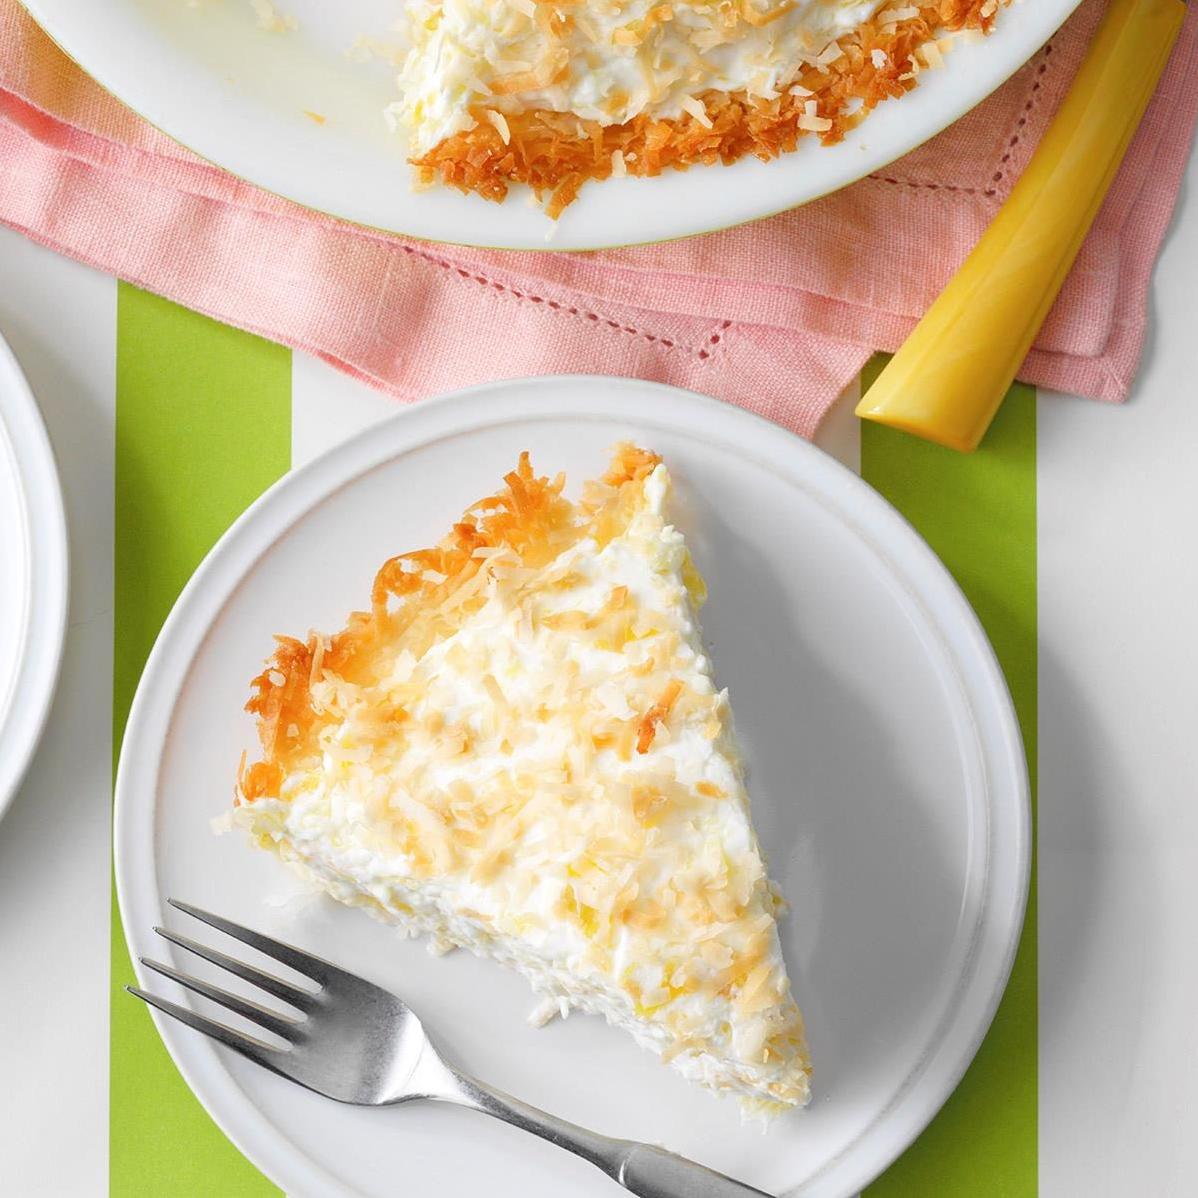 Delicious Brazilian Coconut Pie with Exotic Fruit Toppings